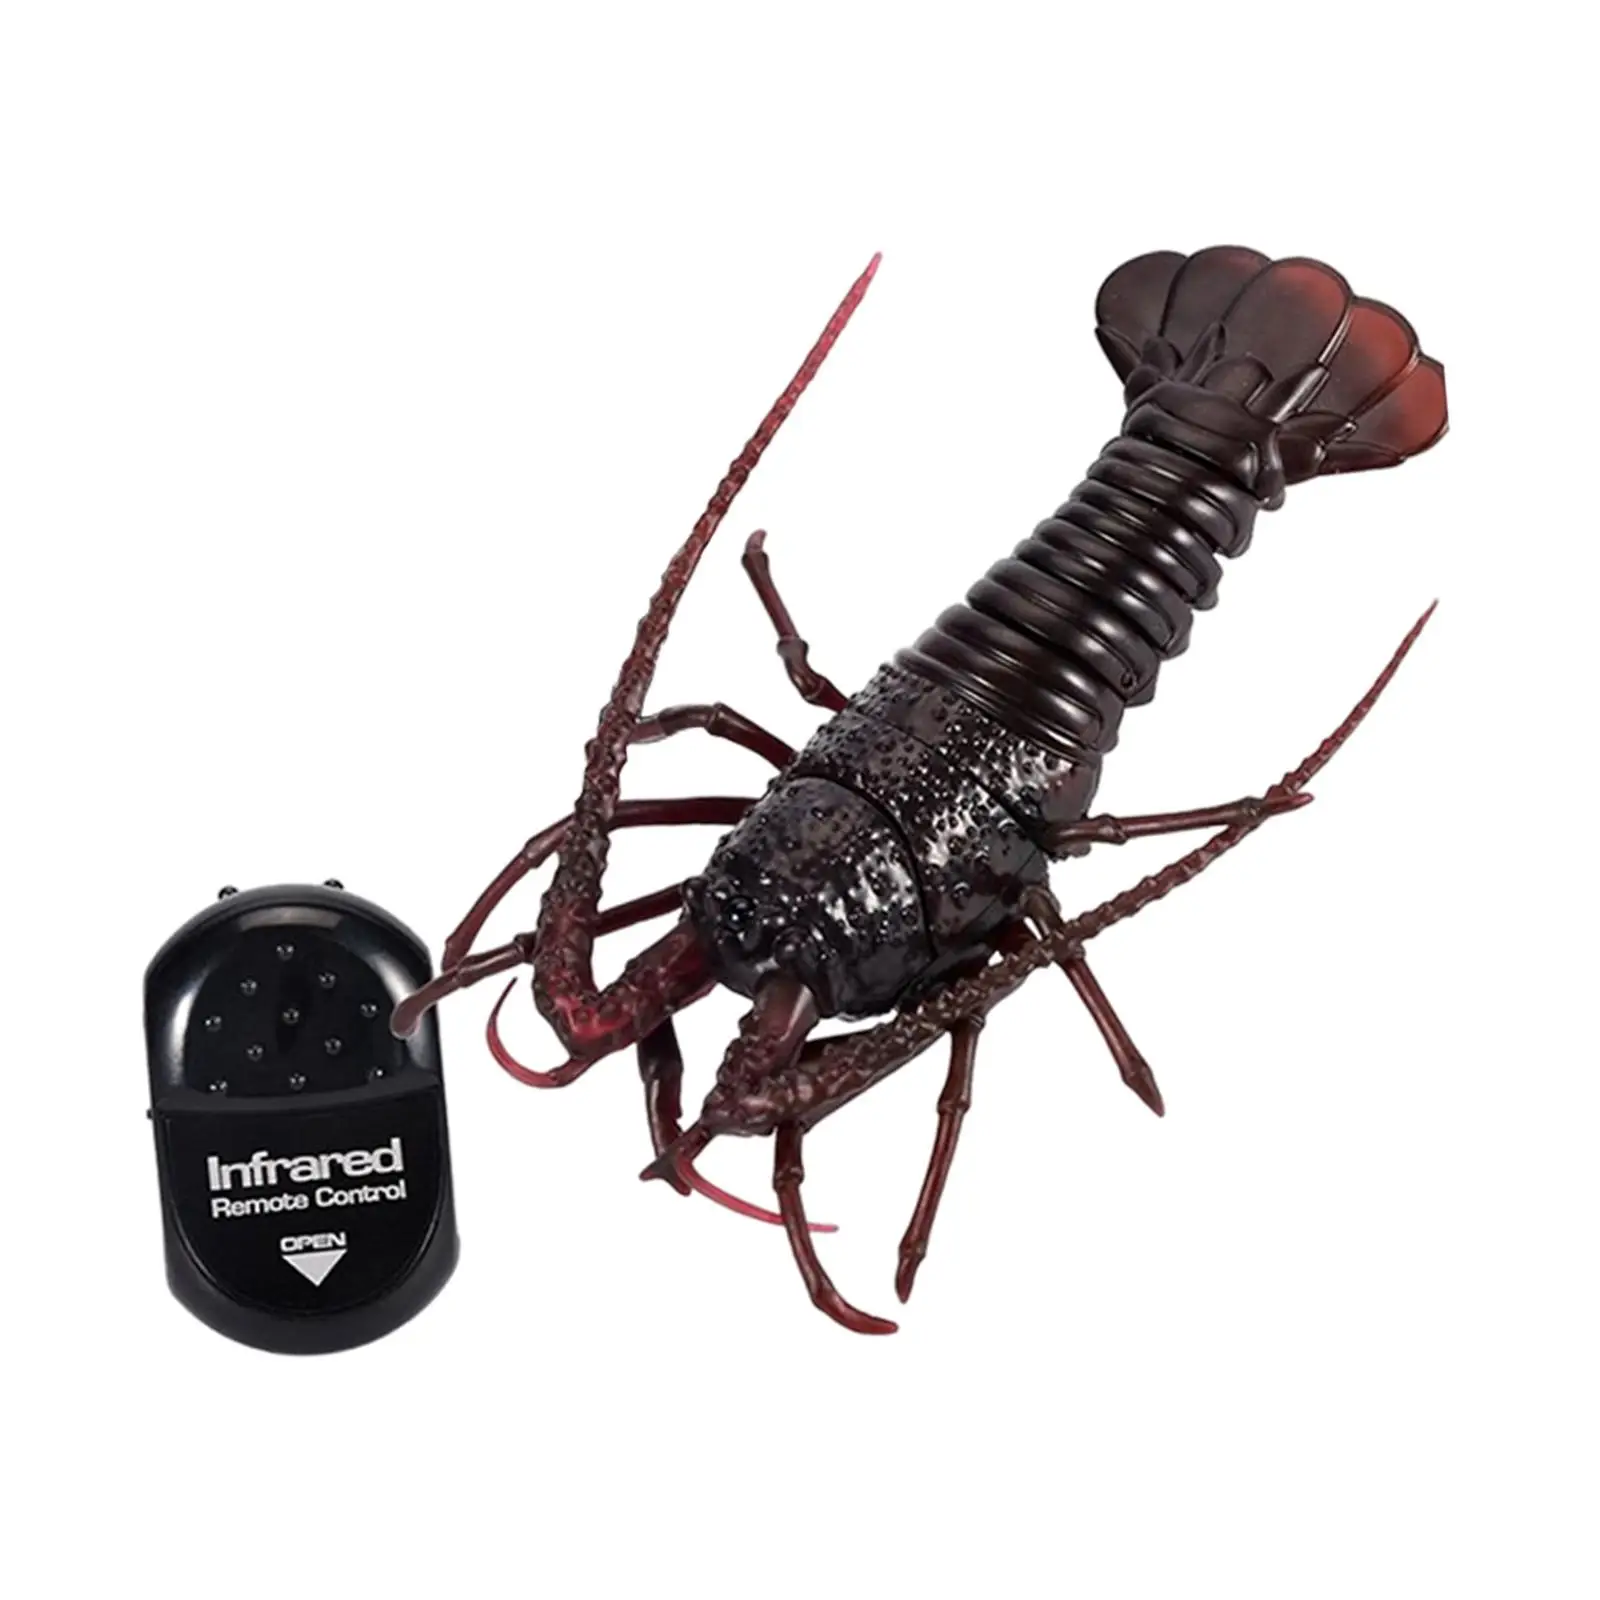 RC Remote Control Simulation Crawfish Realistic Remote Control Vehicle Car Animal Electric Infrared RC Shrimp for Children Gifts